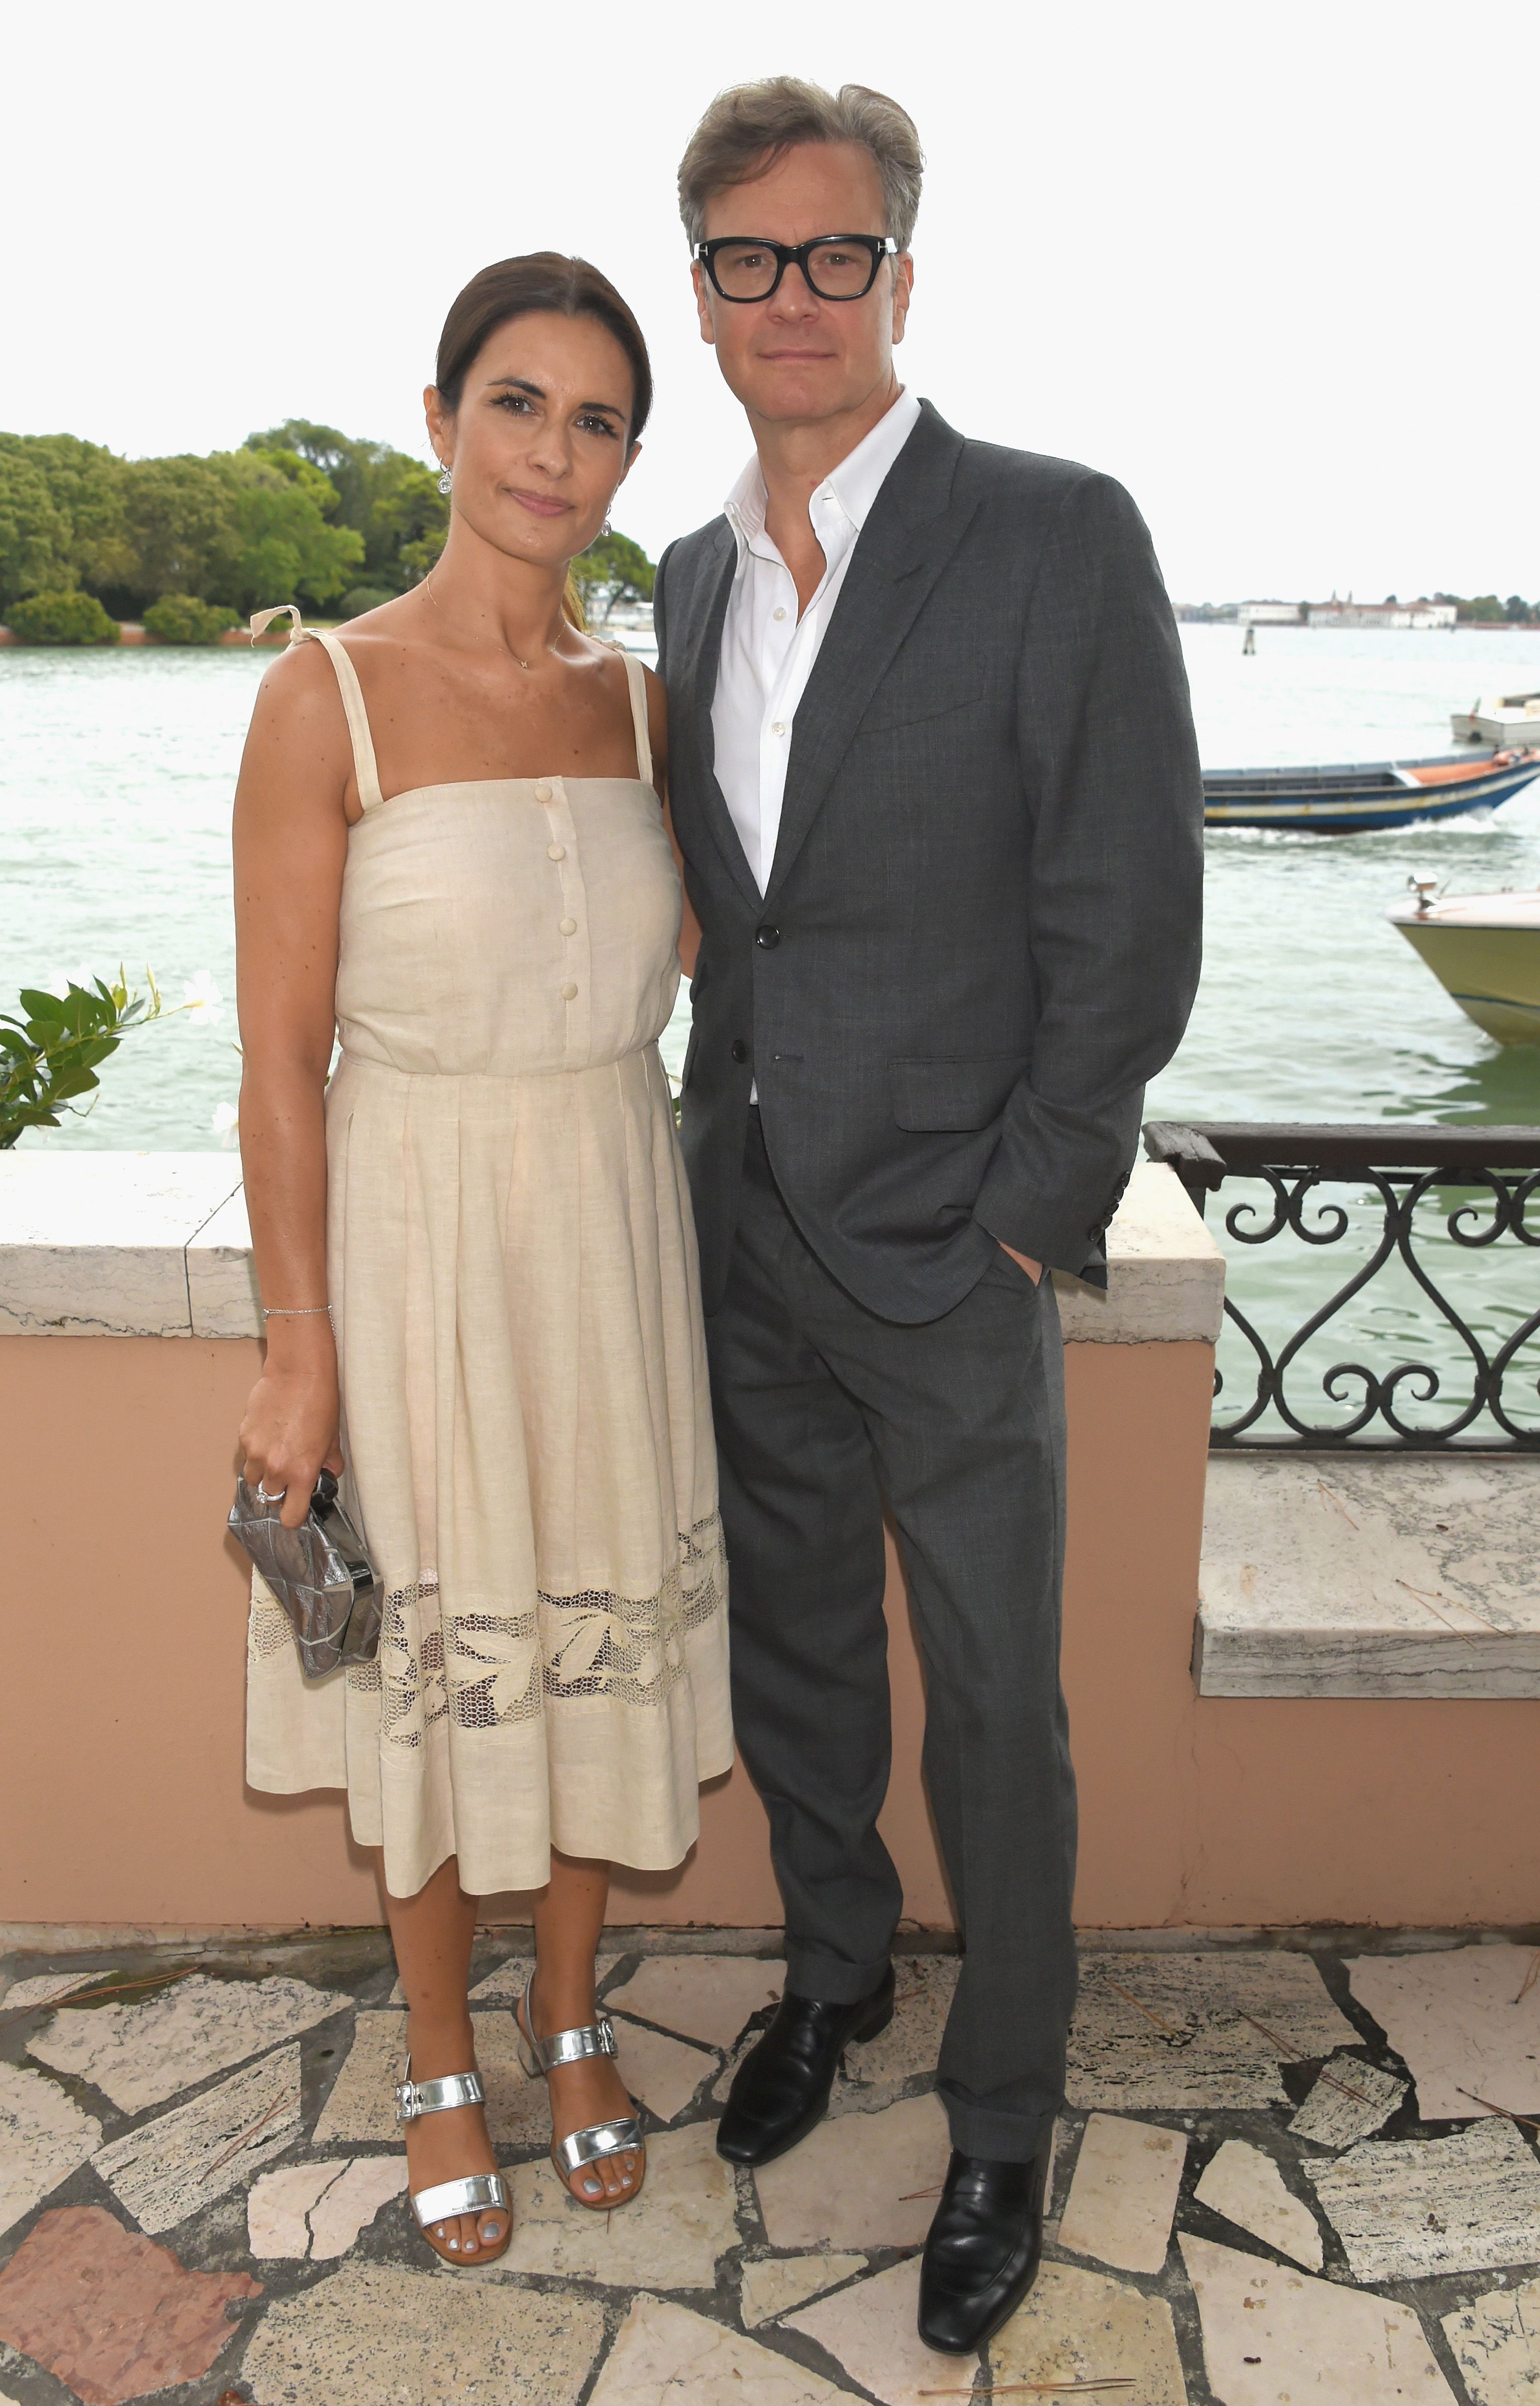 Colin Firth & Wife Livia Giuggioli Split After Her Rumored Romance With A  Journalist